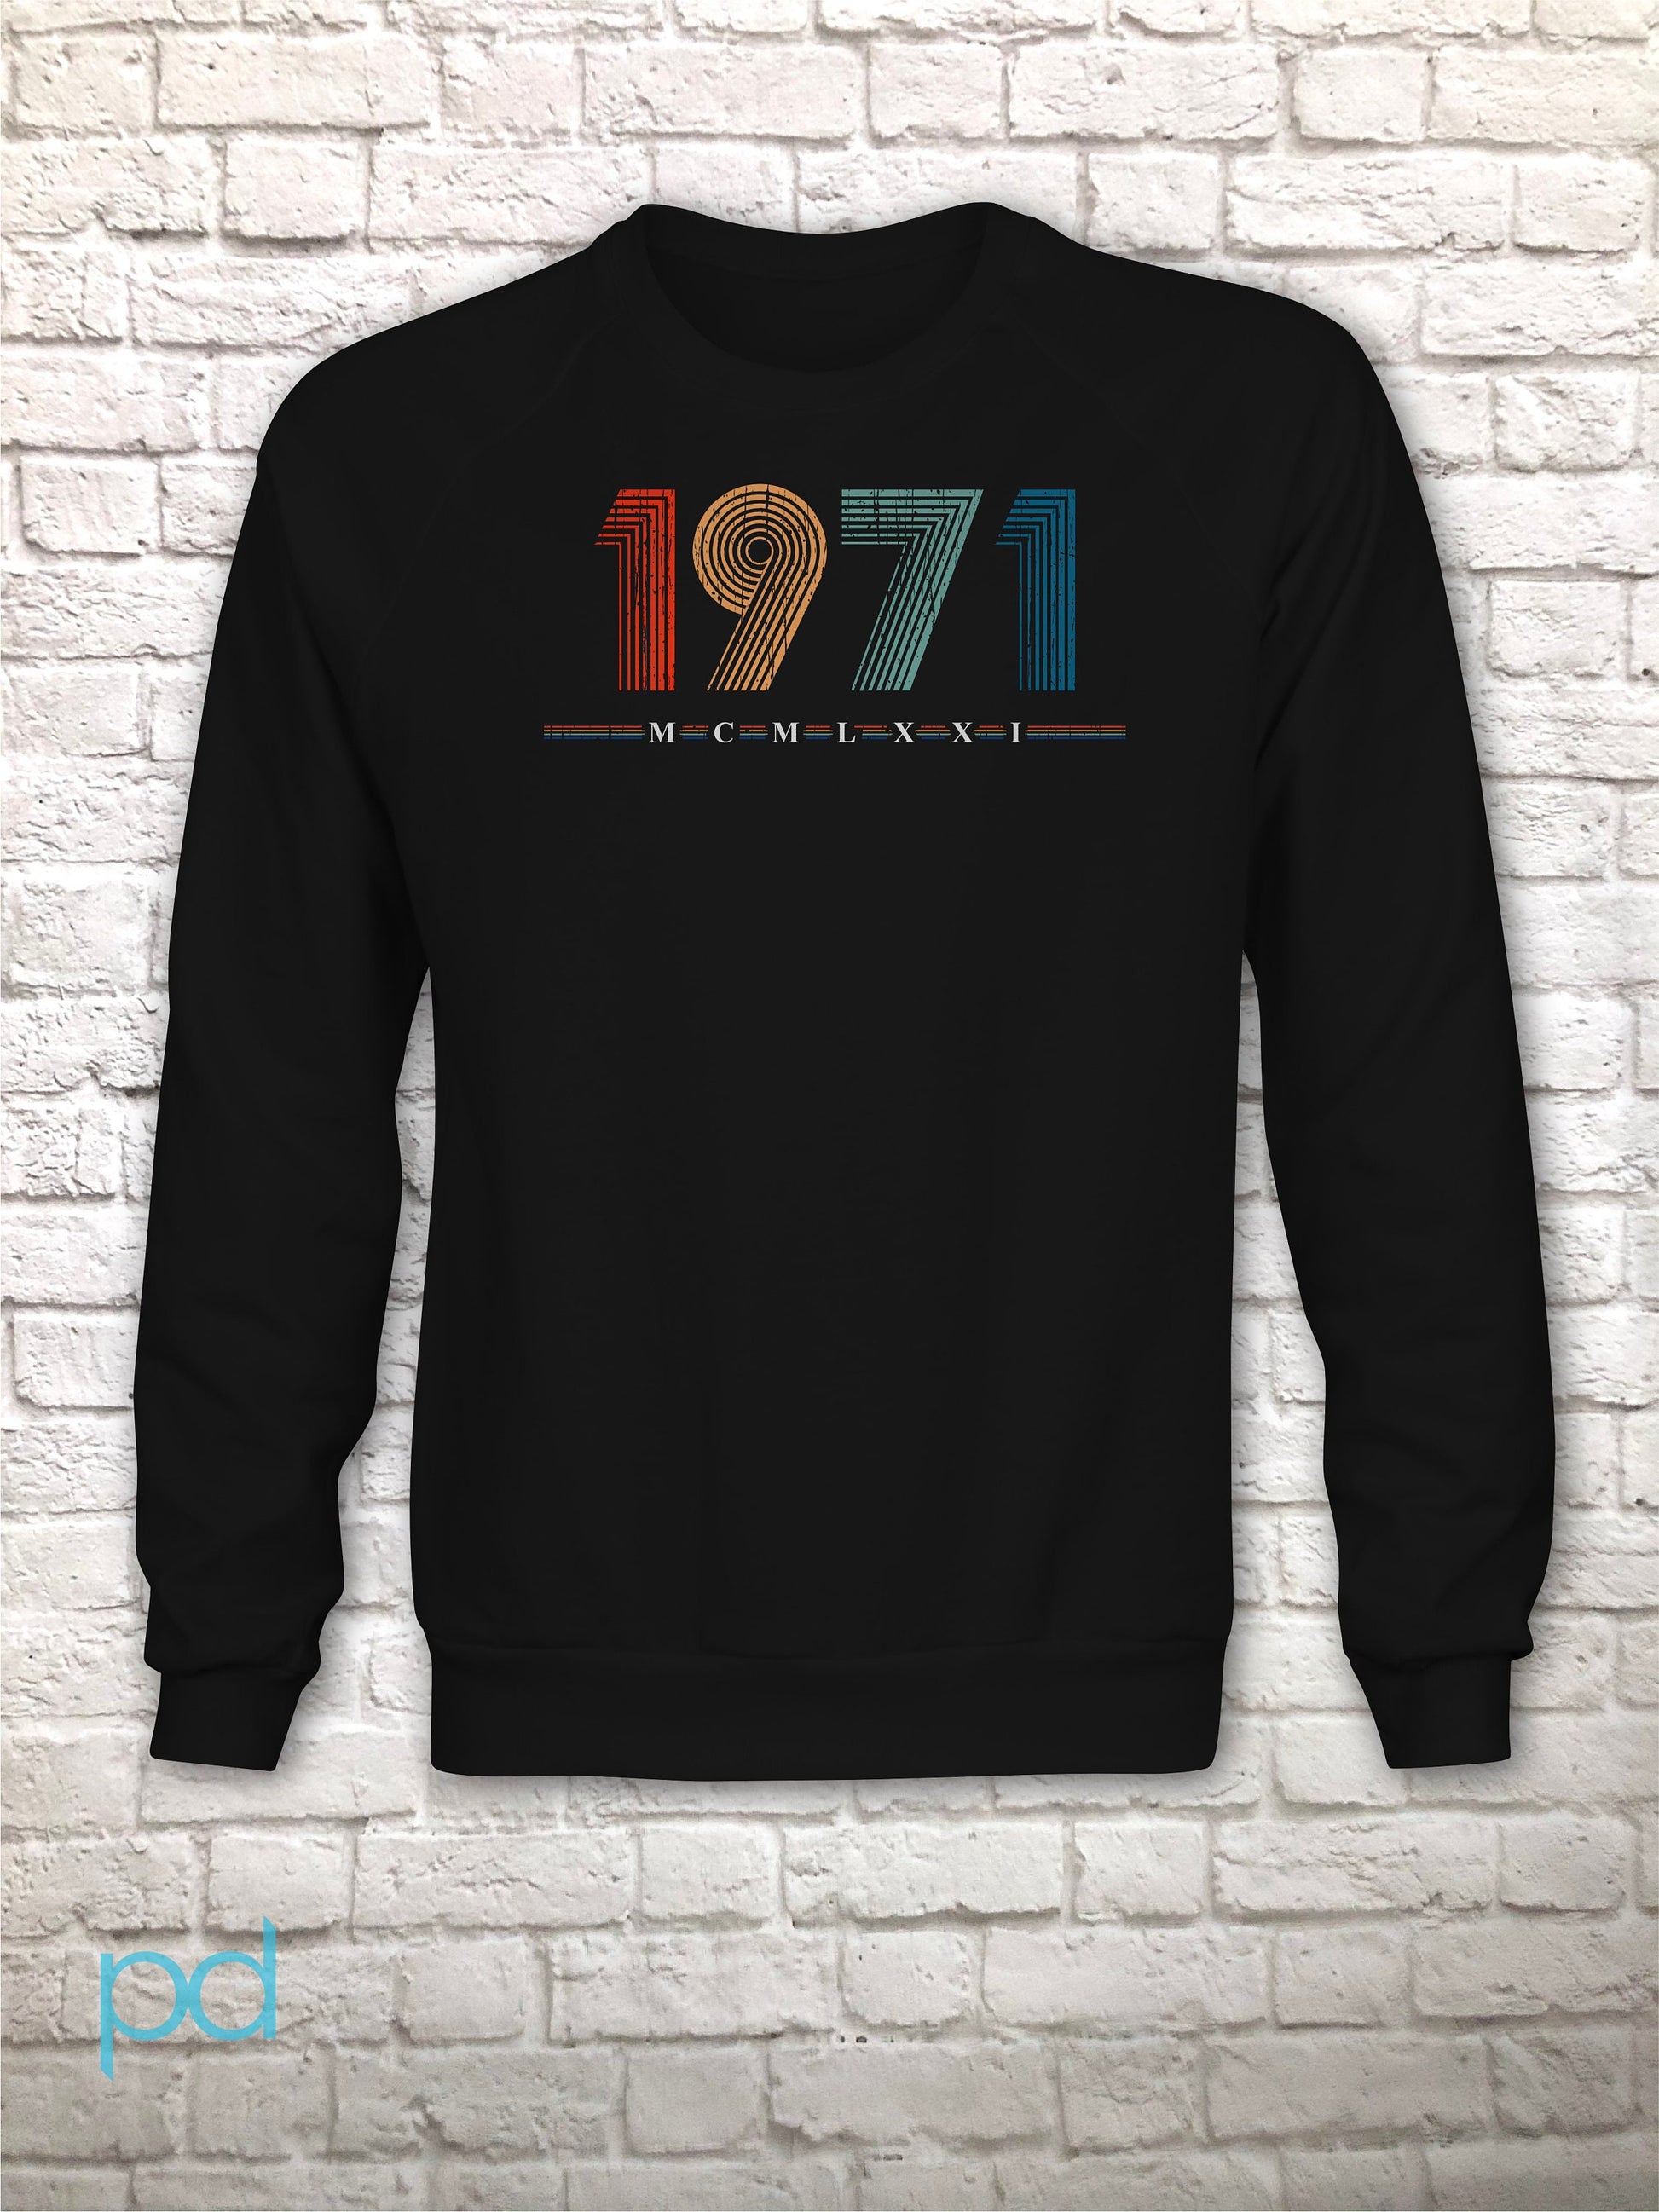 1971 Longsleeve Sweatshirt, 51st Birthday Gift Sweater in Retro & Vintage 70s style, MCMLXXI Fiftieth Bday Jumper Top For Men or Women